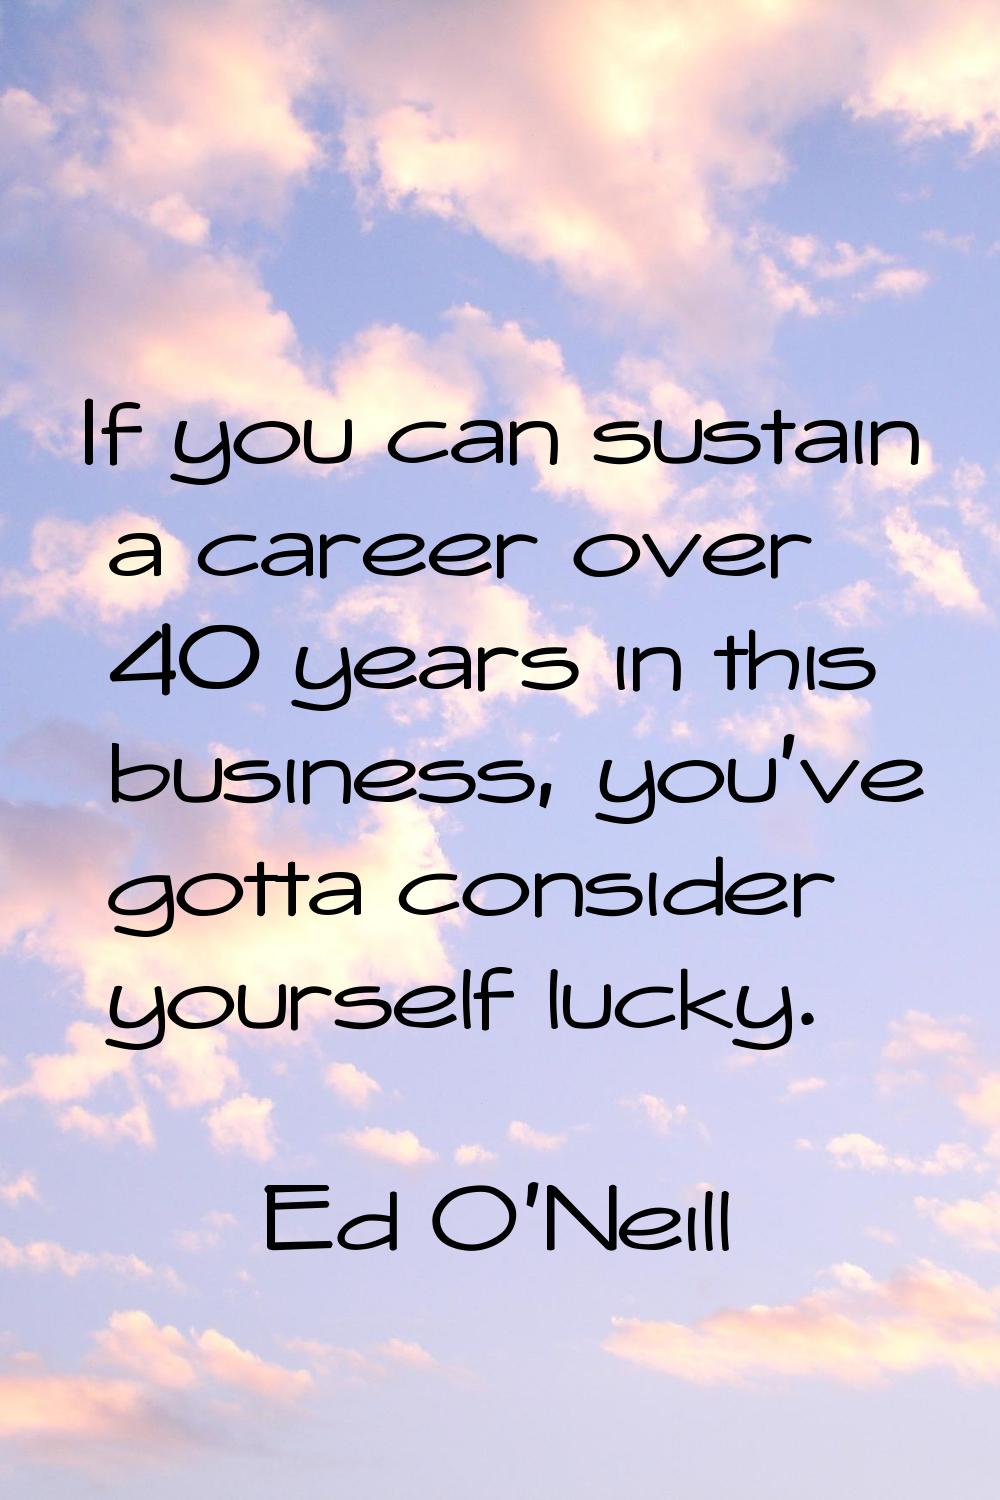 If you can sustain a career over 40 years in this business, you've gotta consider yourself lucky.